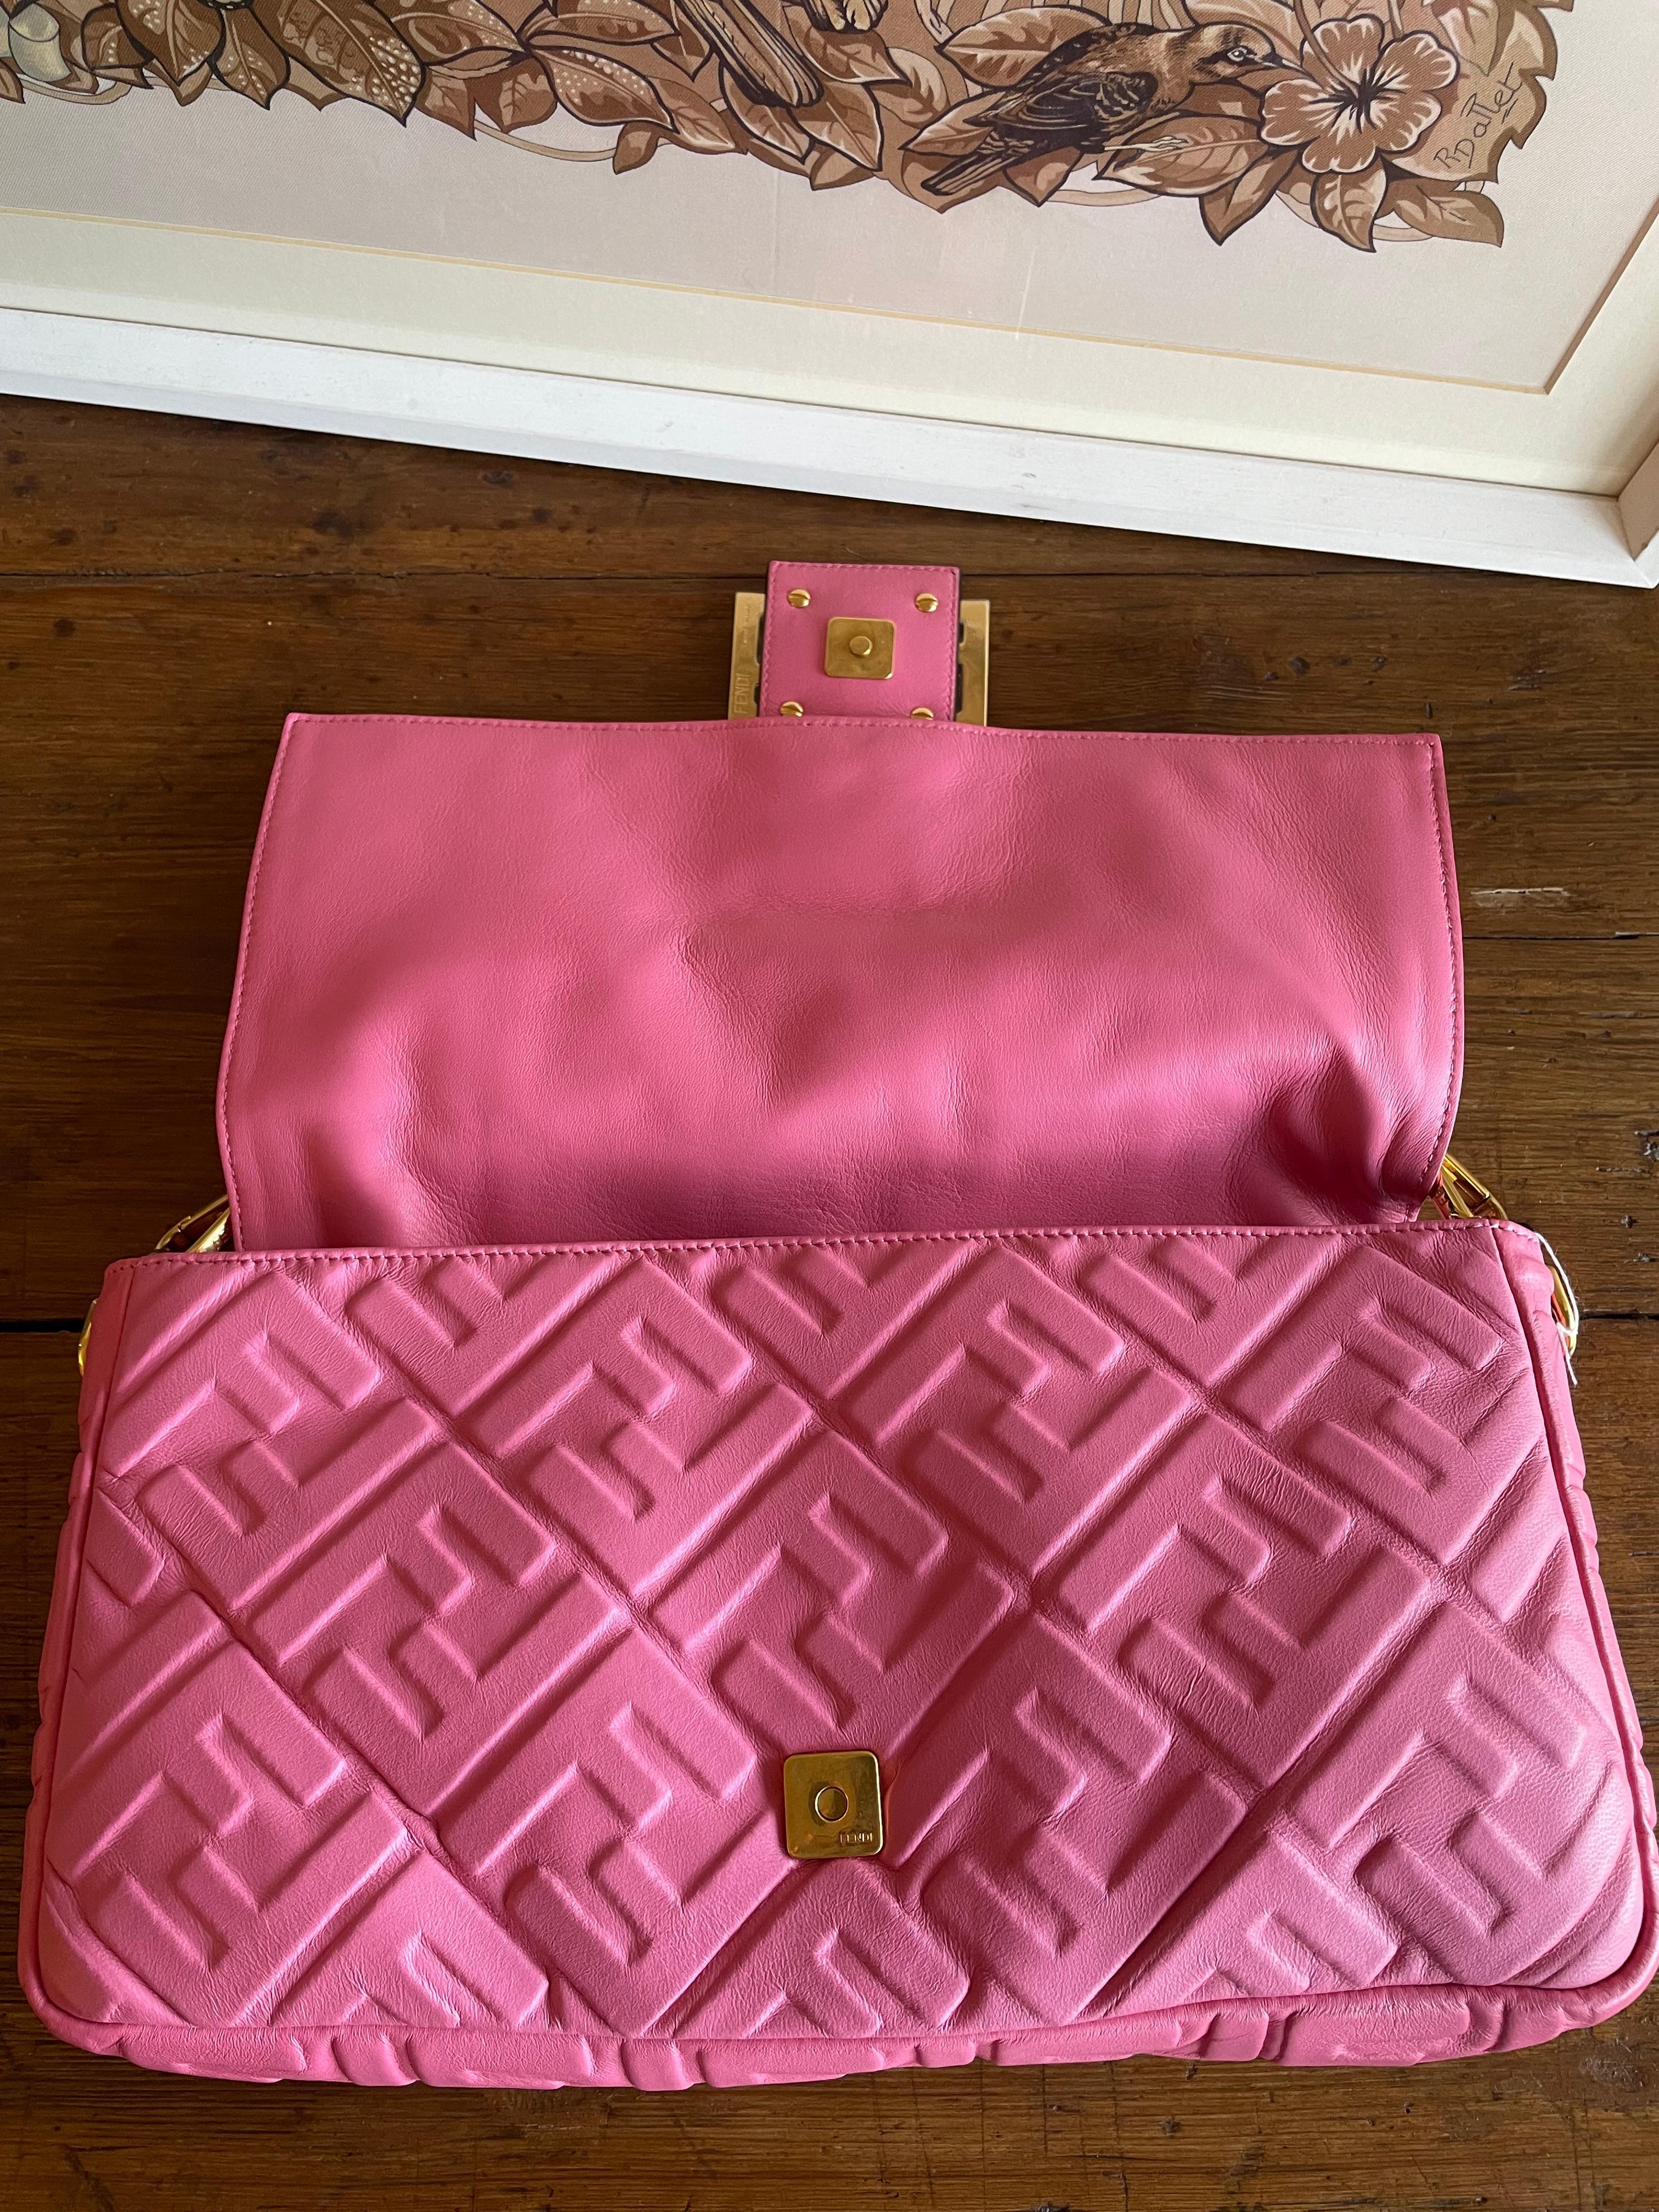 New Fendi baguette bag in pink nappa leather. 3